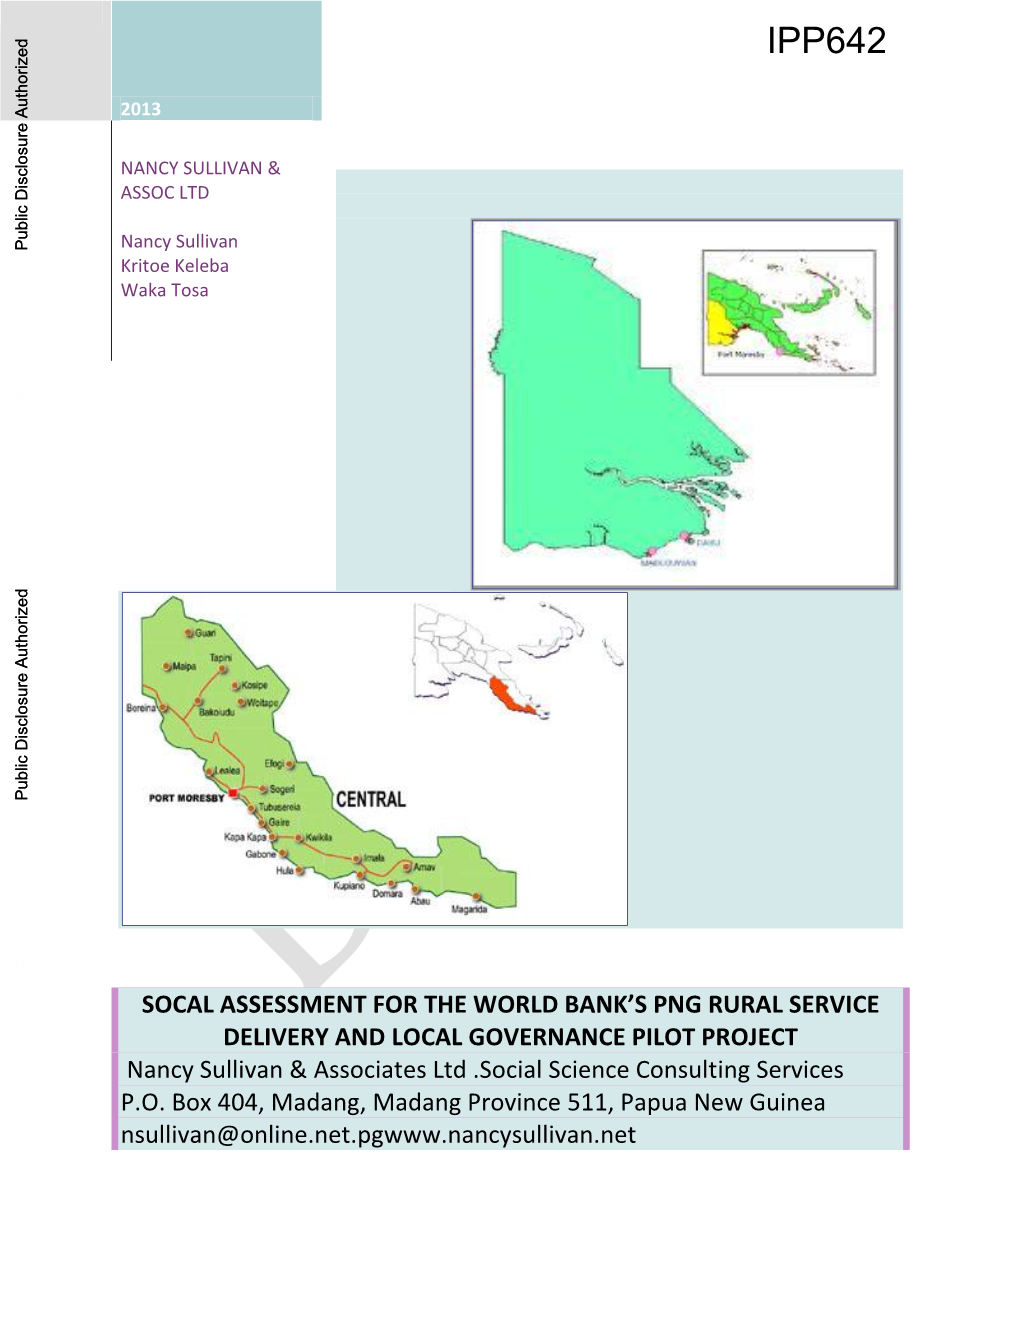 Chapter 3: Western Province Rapid Rural Assessment Data